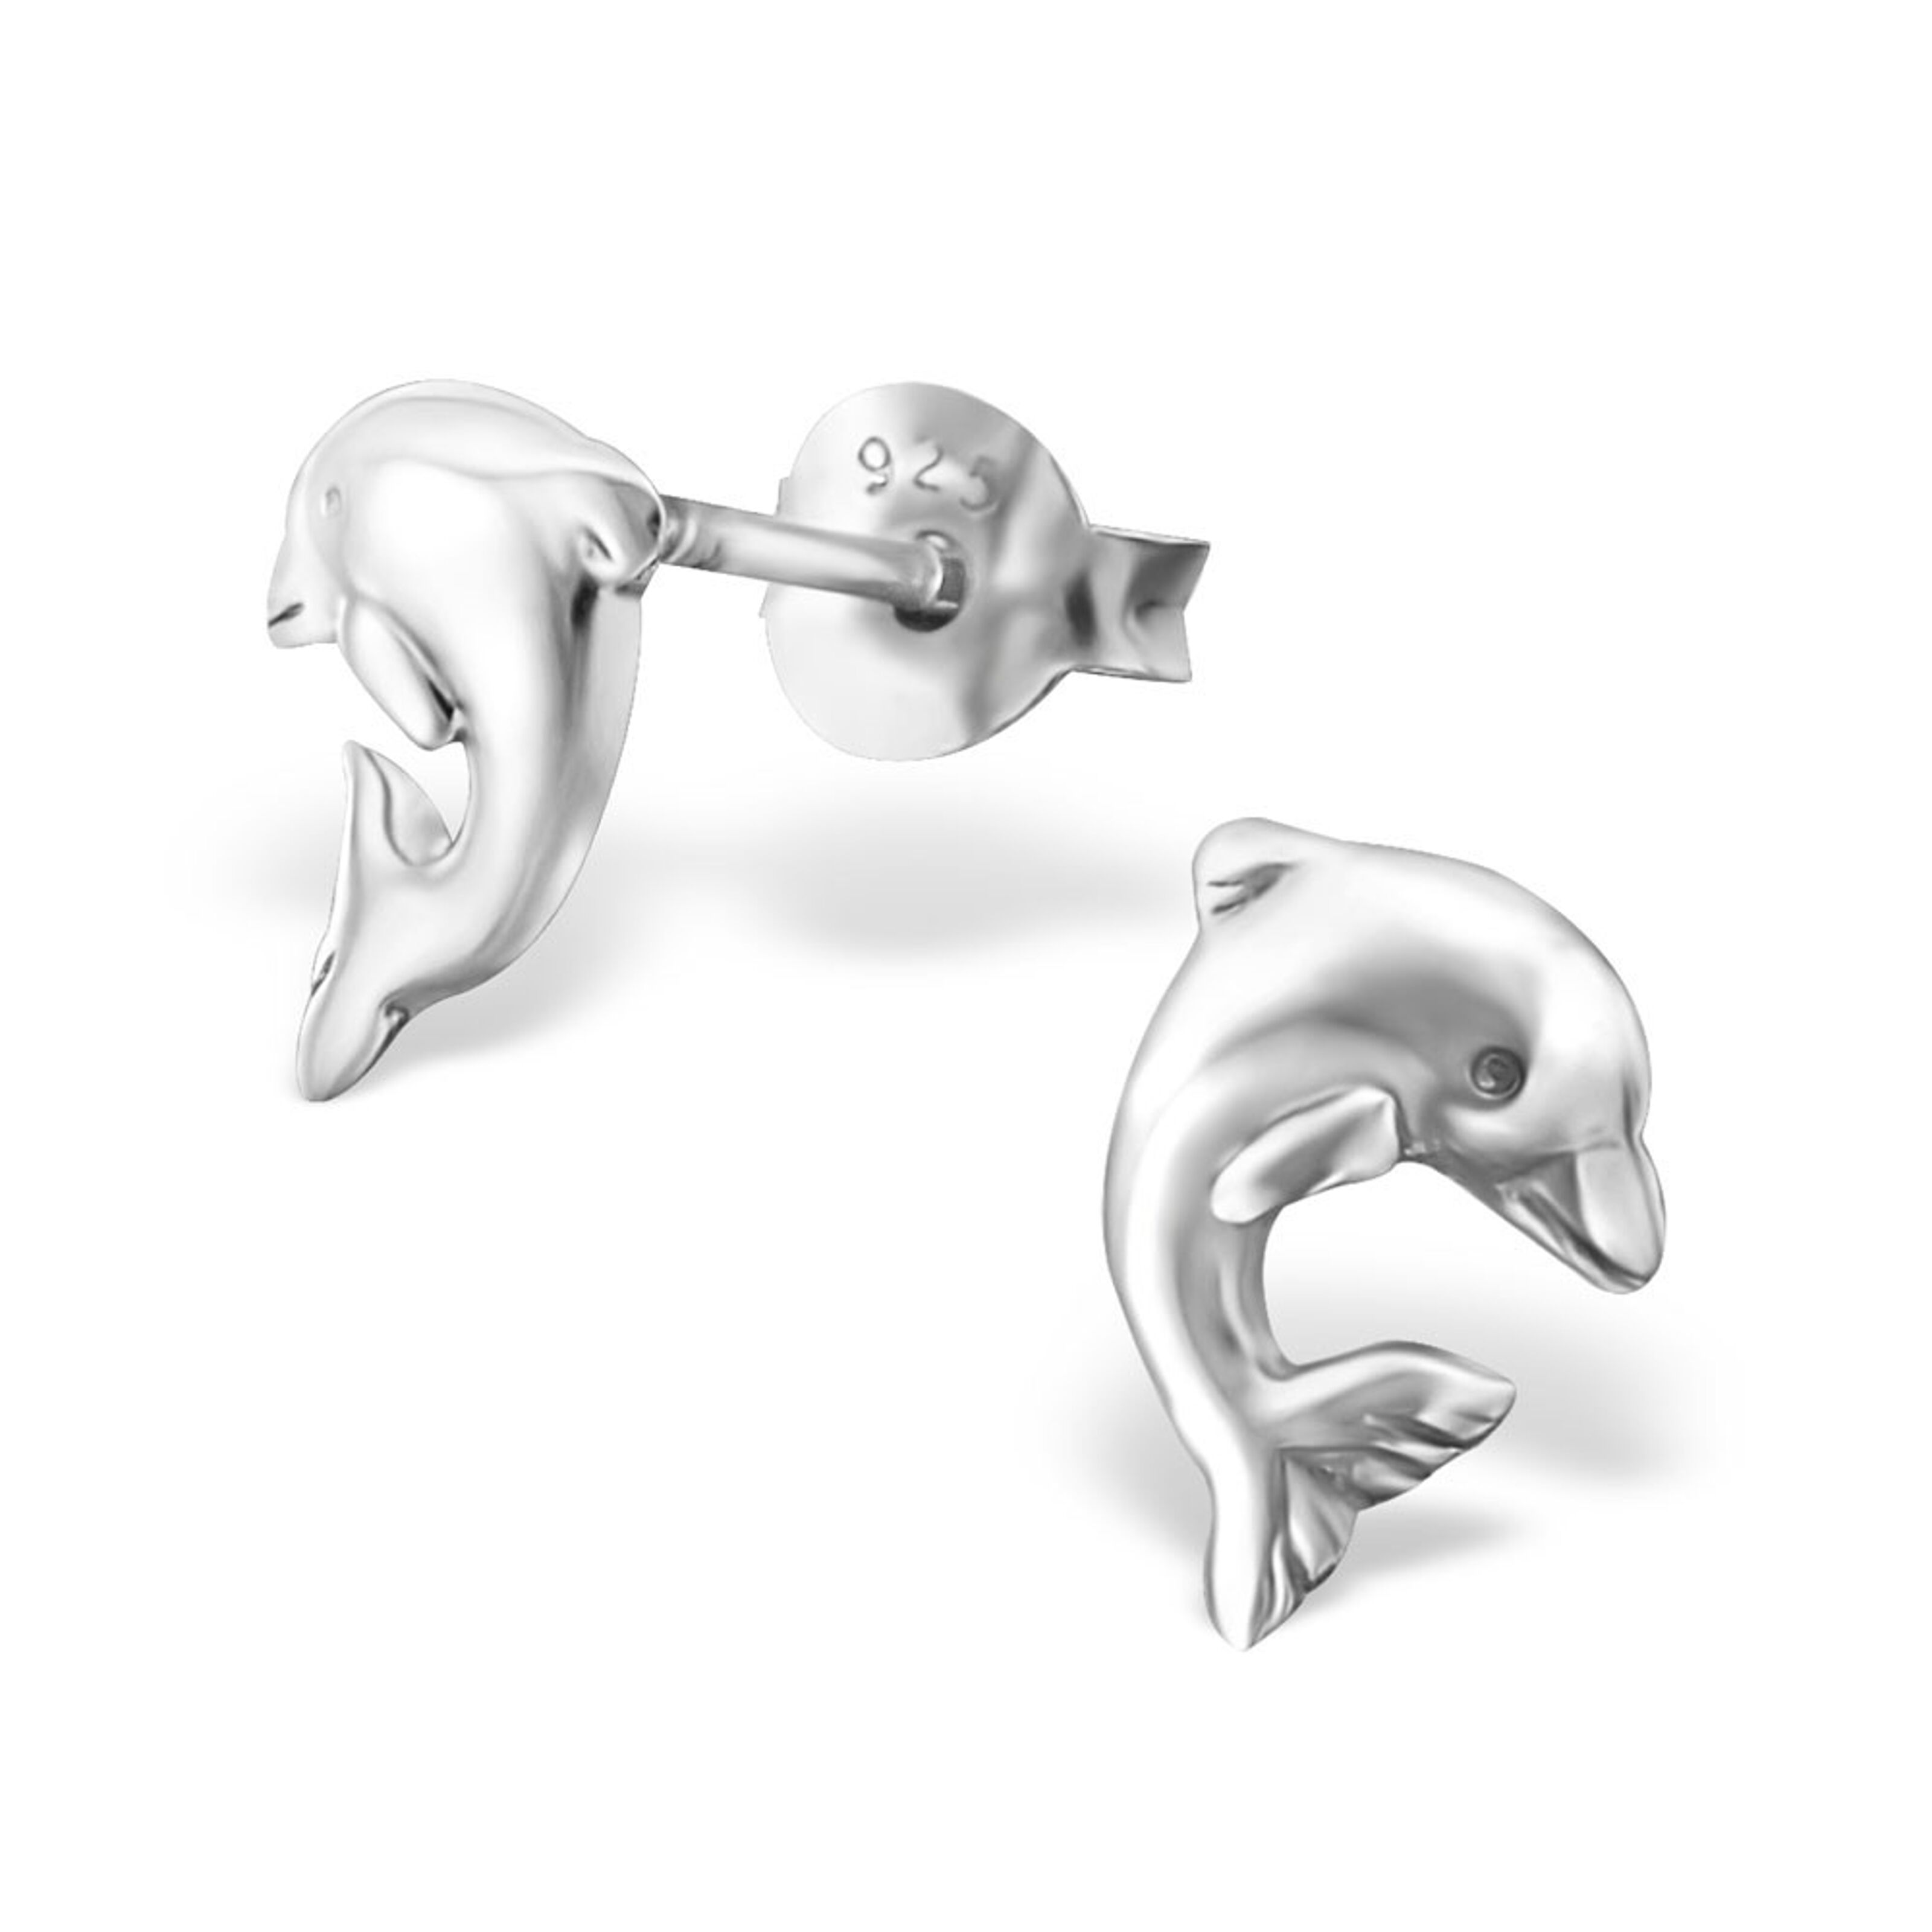 Buy studs jumping mm 925 8 wholesale dolphin Ear silver